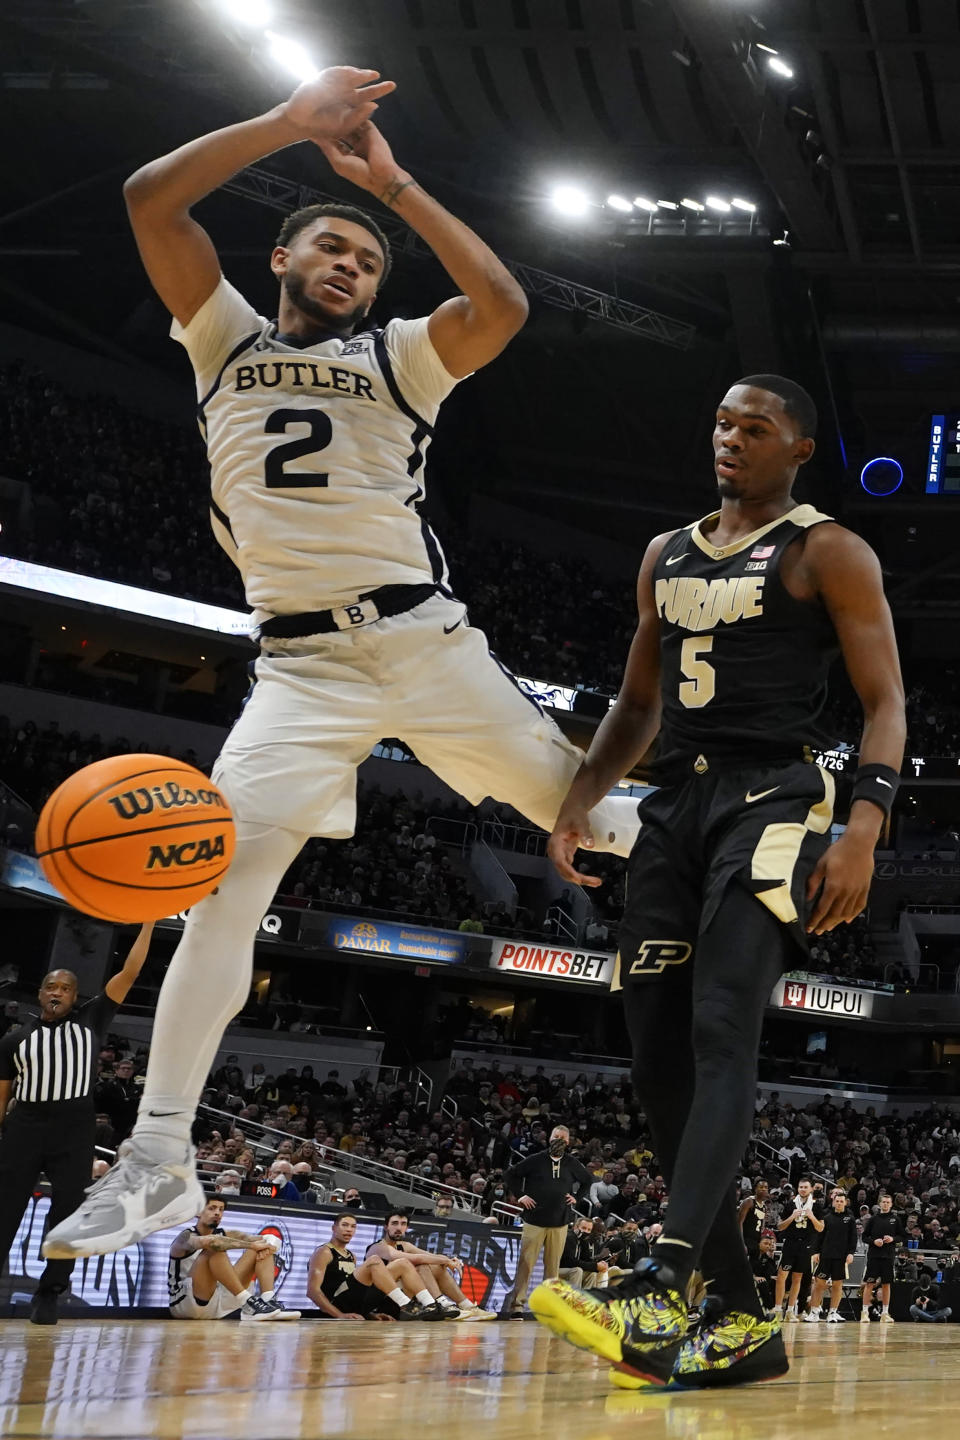 Butler guard Aaron Thompson (2) loses the ball out of bounds ahead of Purdue guard Brandon Newman (5) during the second half of an NCAA college basketball game, Saturday, Dec. 18, 2021, in Indianapolis. (AP Photo/AJ Mast)